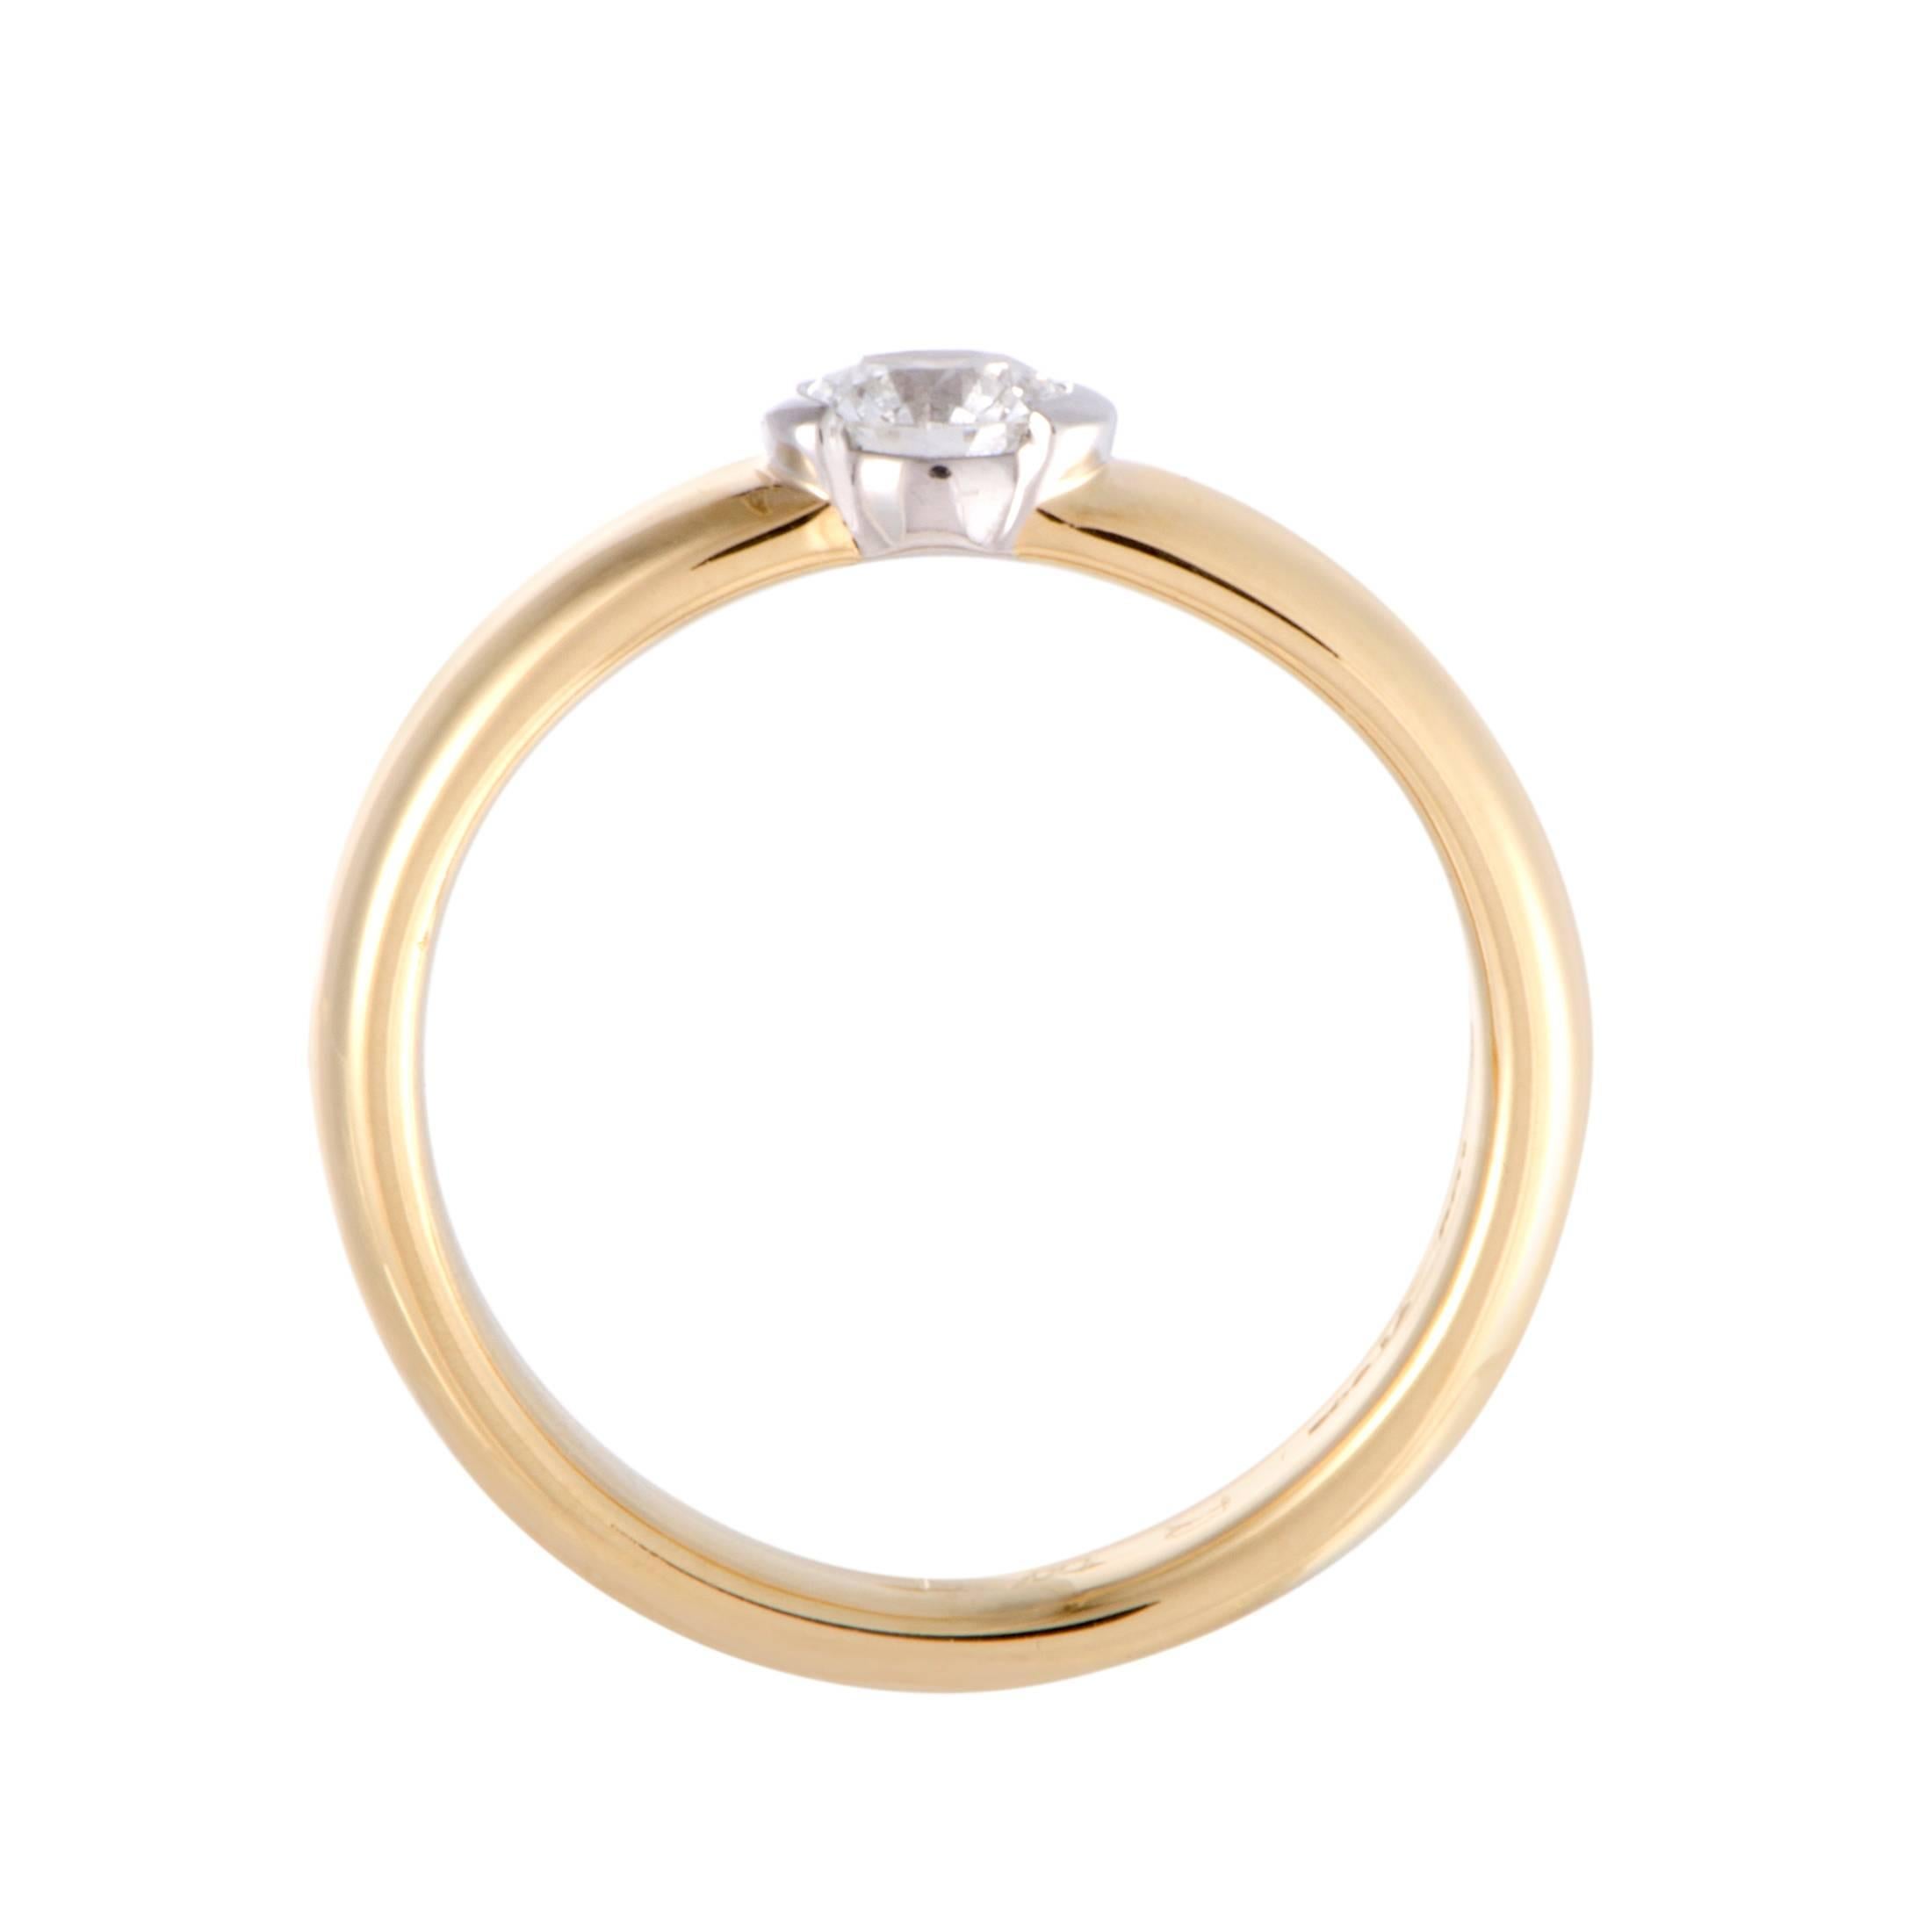 Embodying the very essence of the famed American jeweler’s designs, this Tiffany & Co. ring exudes timeless elegance and refinement. Made of classy 18K yellow gold, the ring features a segment in platinum, set with an F-color diamond of VS1